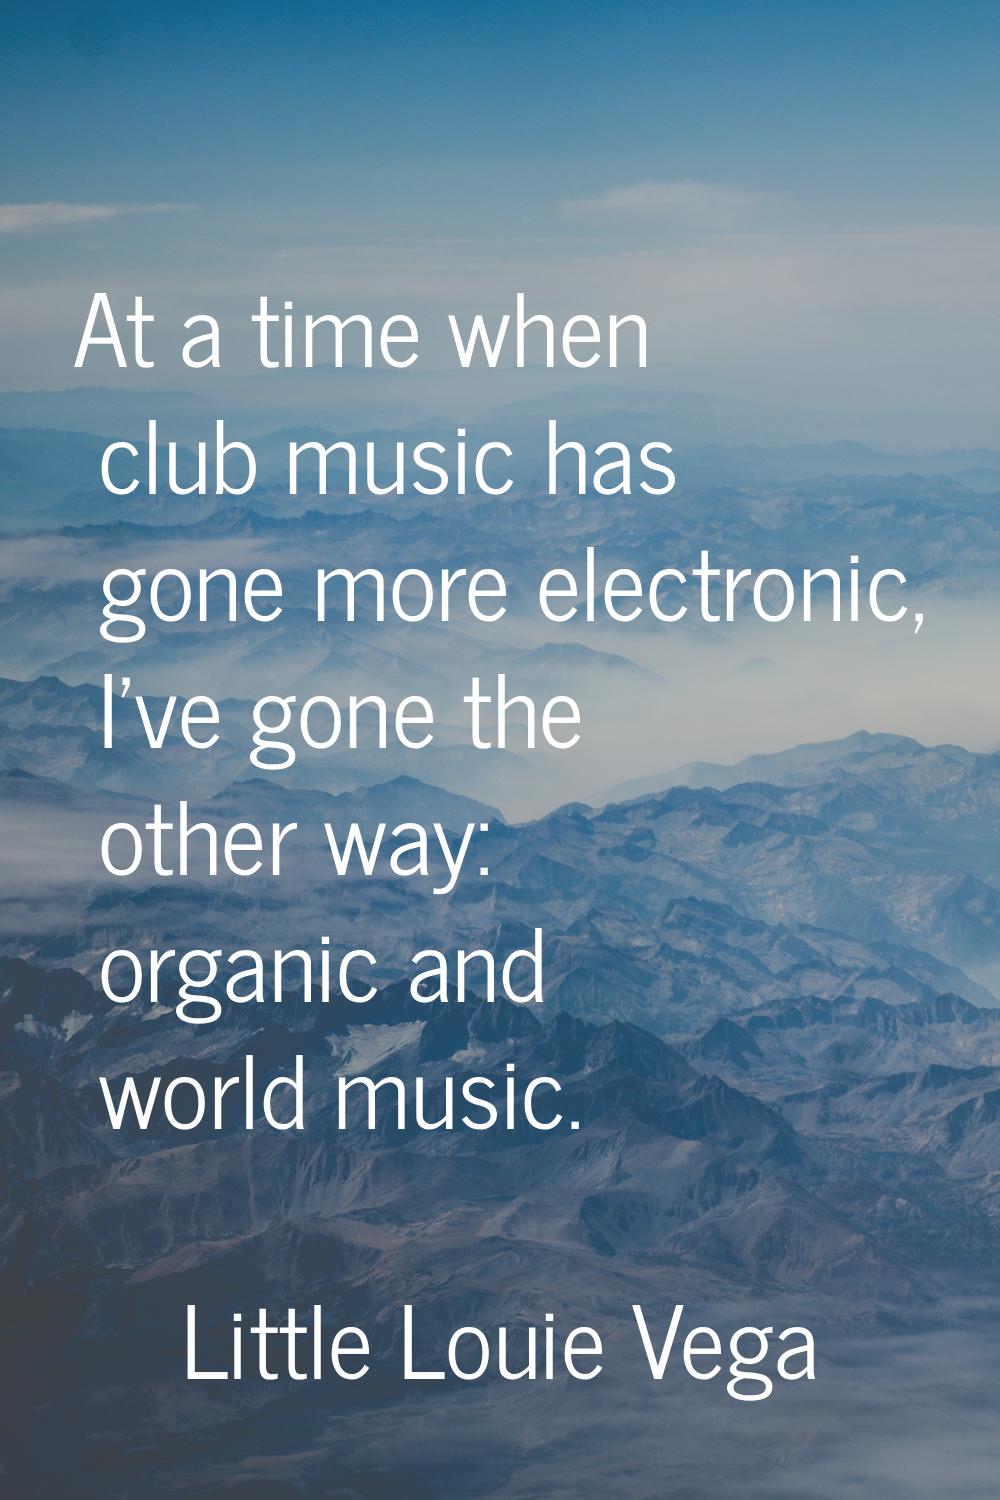 At a time when club music has gone more electronic, I've gone the other way: organic and world musi